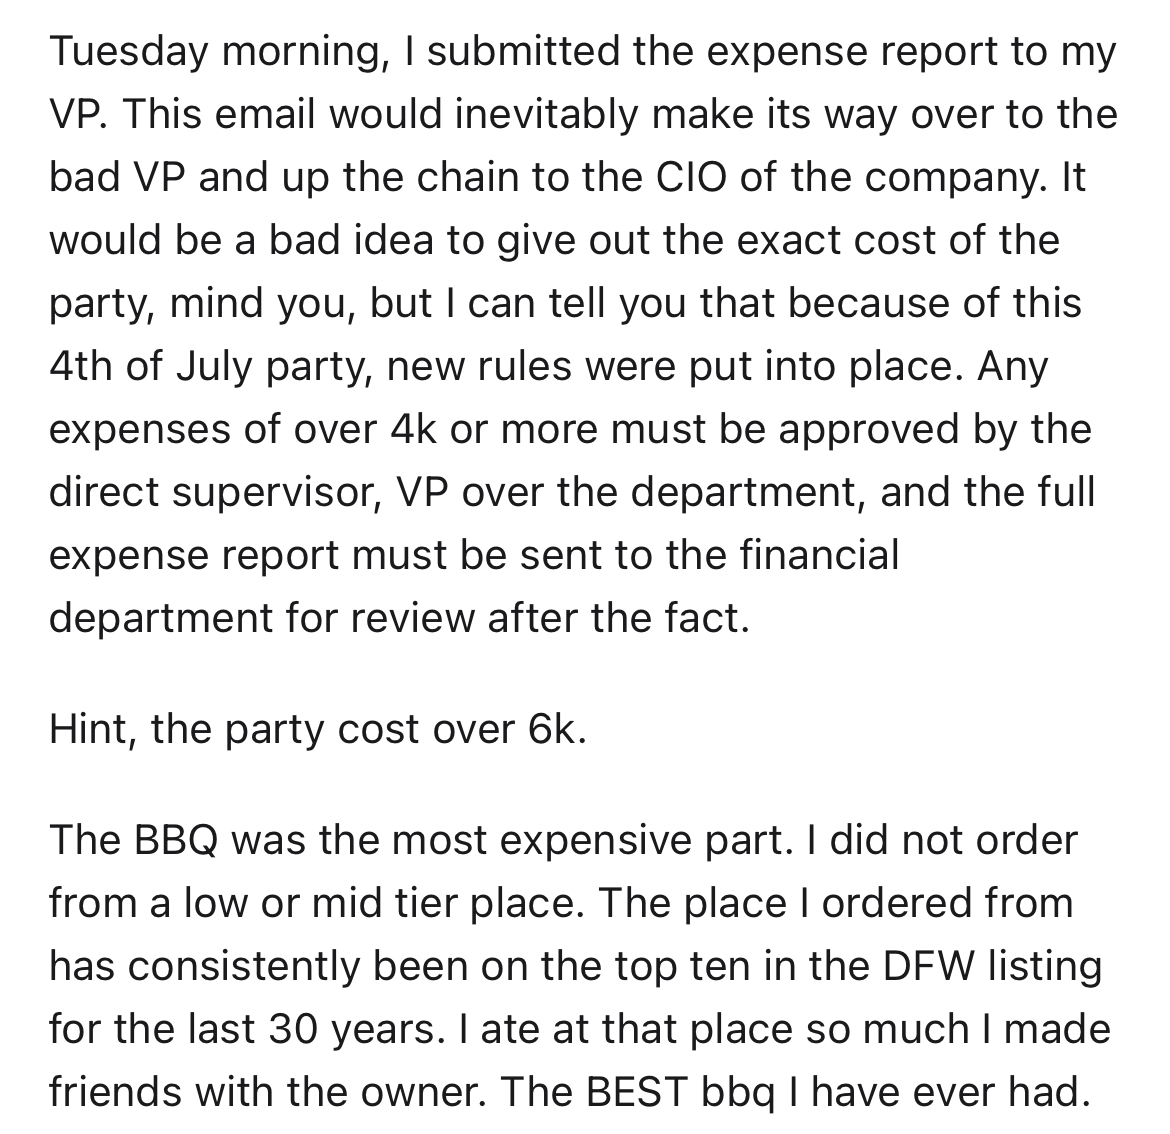 employees throw $6k 4th of July party at work -document - Tuesday morning, I submitted the expense report to my Vp. This email would inevitably make its way over to the bad Vp and up the chain to the Cio of the company. It would be a bad idea to give out 